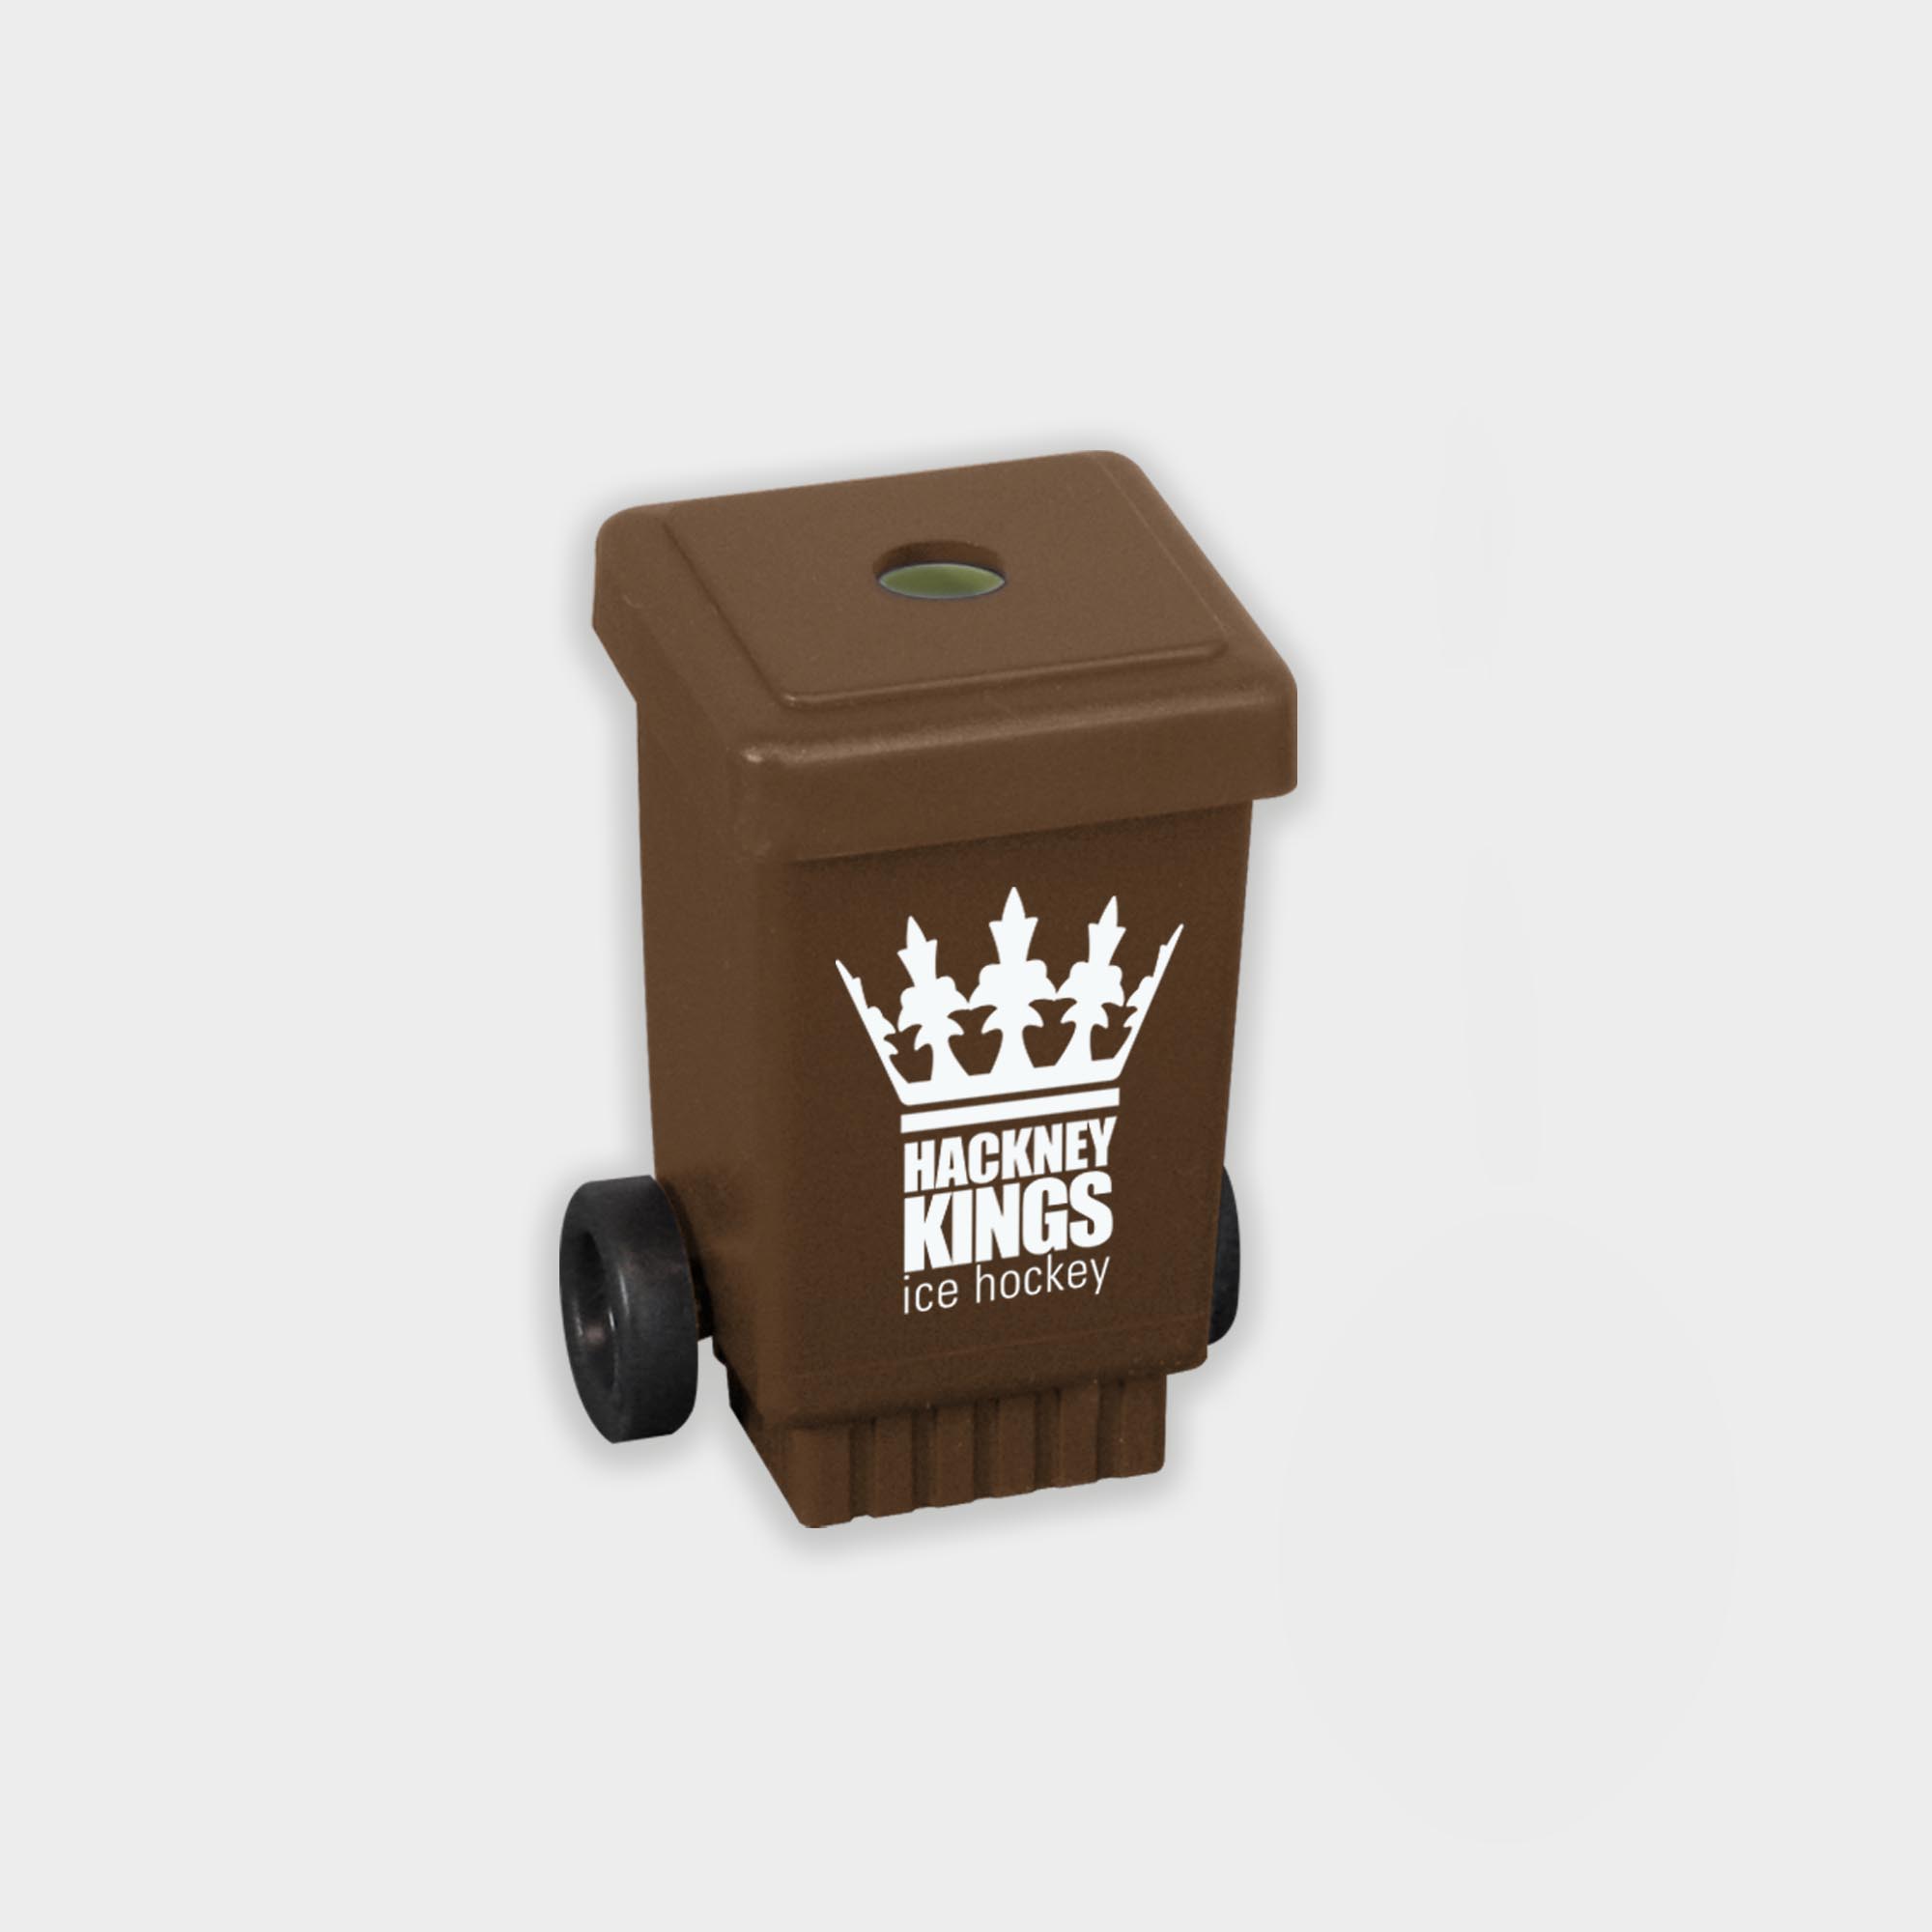 The Green & Good Wheelie Bin Pencil Sharpener made from recycled plastic (polystyrene). Made in the EU and available in a variety of colours.Features include a removable lid and small black wheels. Ideal for councils and waste management companies. Brown